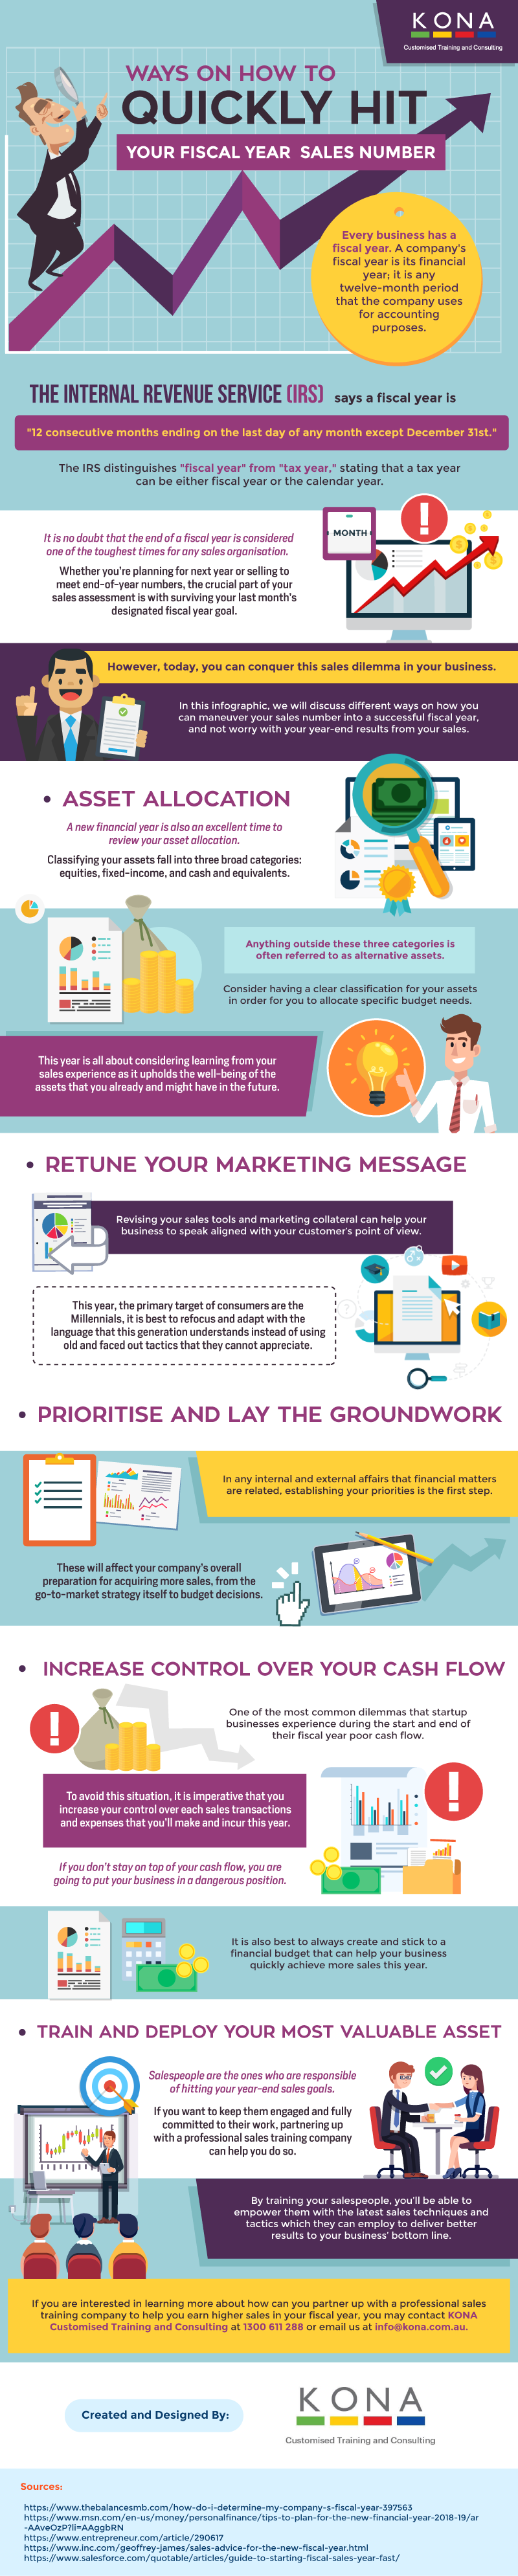 Ways on How to Quickly Hit Your Fiscal Year Sales Number - Infographic